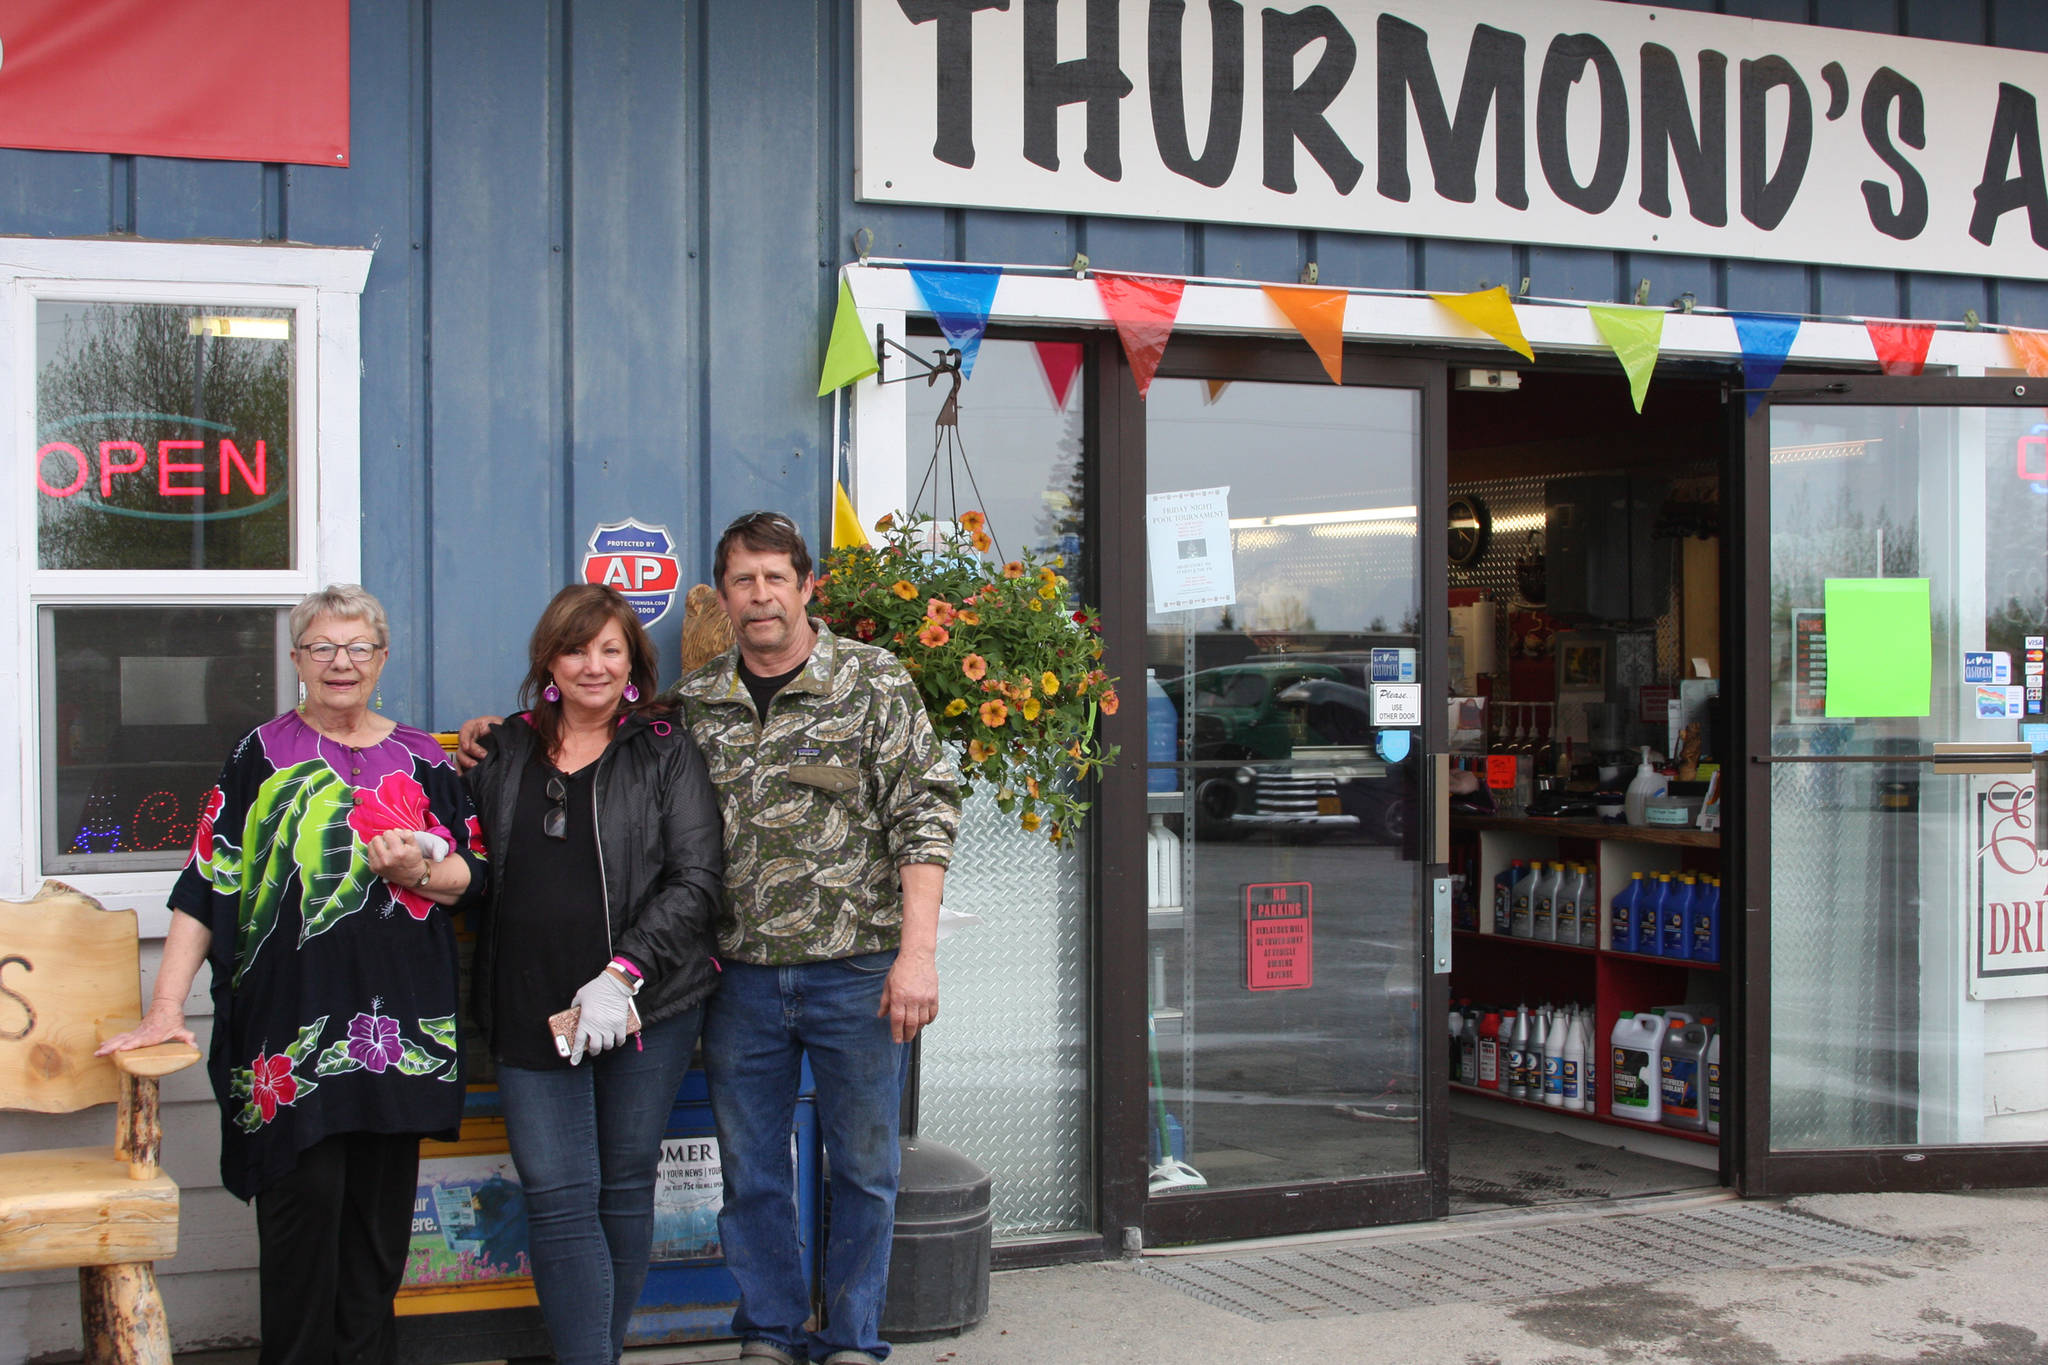 From left to right, Vanita Thurmond, Elaine Griner, and Dale Griner stand outside Thurmond’s Far West Auto in Anchor Point, Alaska at the fifth annual Customer Appreciation Day on Saturday, May 25, 2019. (Photo by Delcenia Cosman)